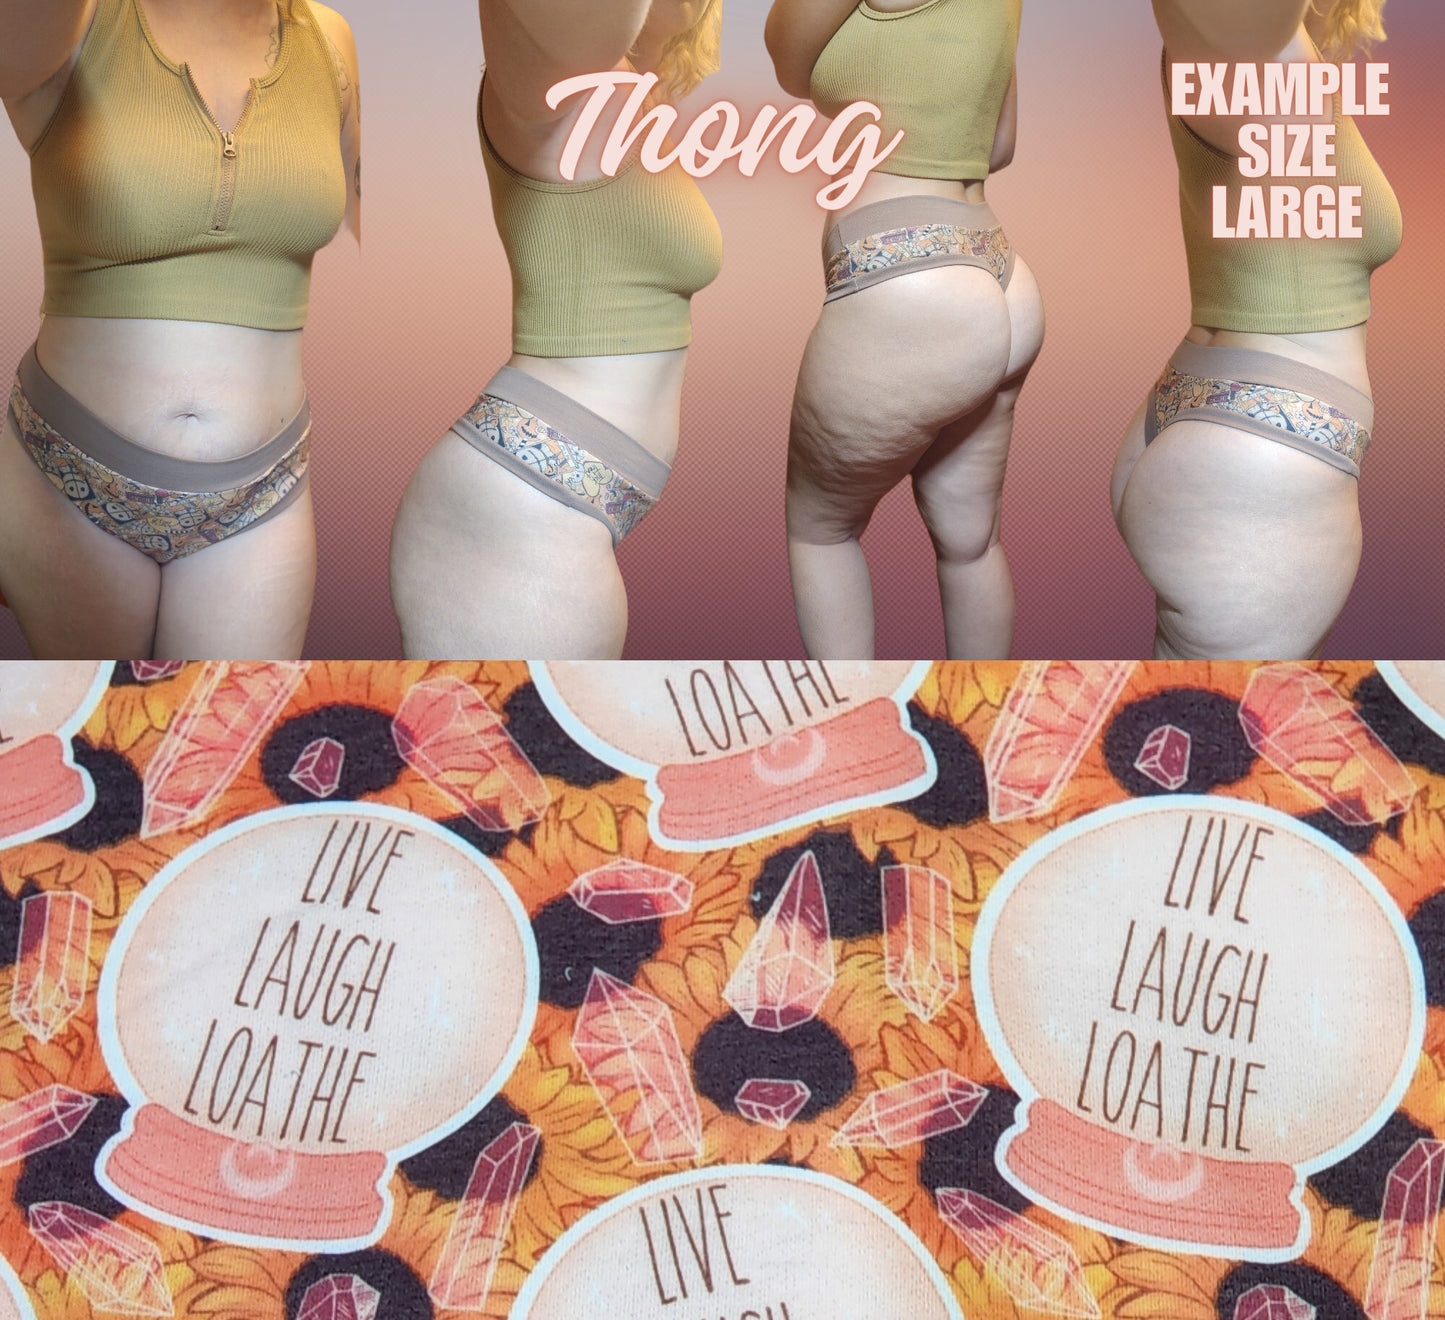 Crystal Ball, Live, Laugh, Loathe, Basic Witch | Thondlewear Thong | Elastic or Knit Bands